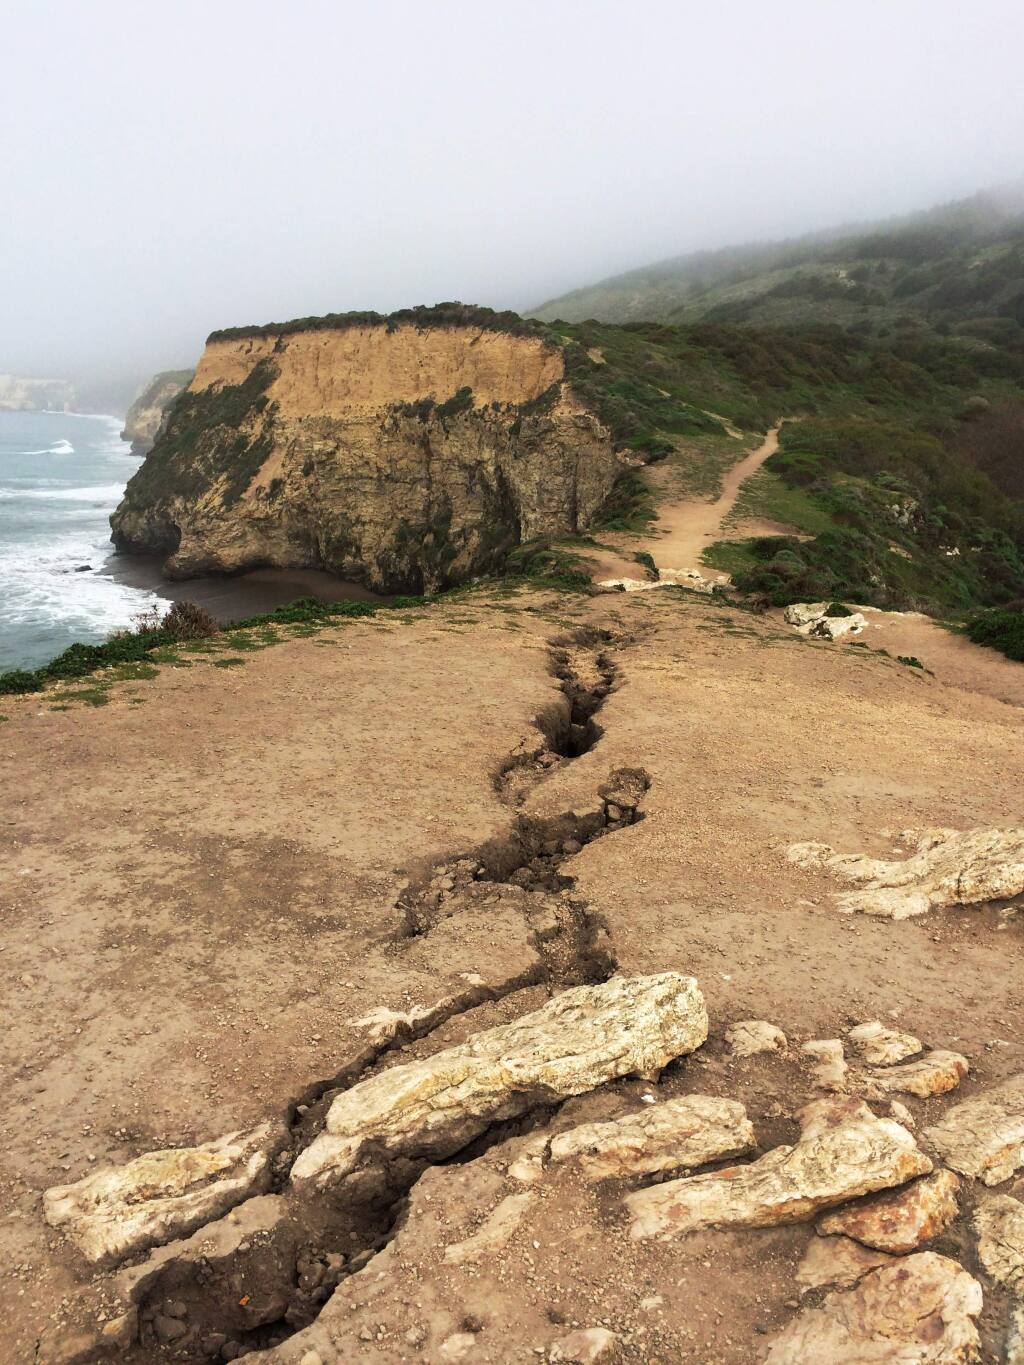 This recent but undated photo provided by Point Reyes National Seashore shows a fissure that has opened up atop Arch Rock within Point Reyes National Seashore on the Northern California coast north of San Francisco. One person is dead and another being treated for life-threatening injuries after the bluff at the end of a popular hiking trail collapsed Saturday, March 21, 2015. Two visitors were standing on the Arch Rock lookout point just before 6 p.m. when the bluff gave way. The pair fell about 70 feet and were covered with rocks and debris. One of the hikers was pronounced dead at the scene. The other was airlifted to a hospital. (AP Photo/Point Reyes National Seashore)